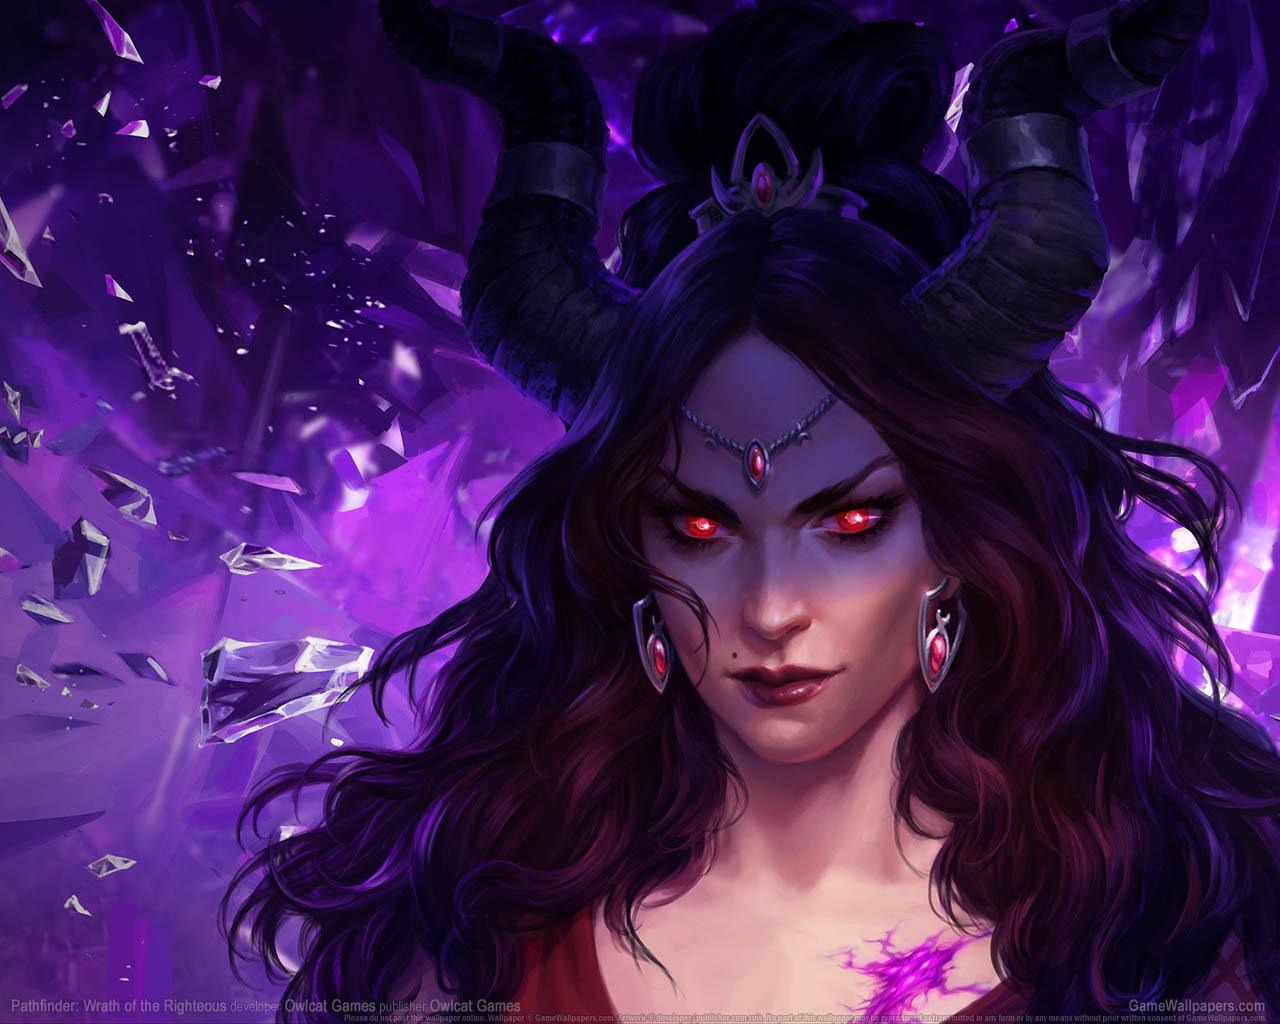 Pathfinder%3A Wrath of the Righteous wallpaper 04 1280x1024